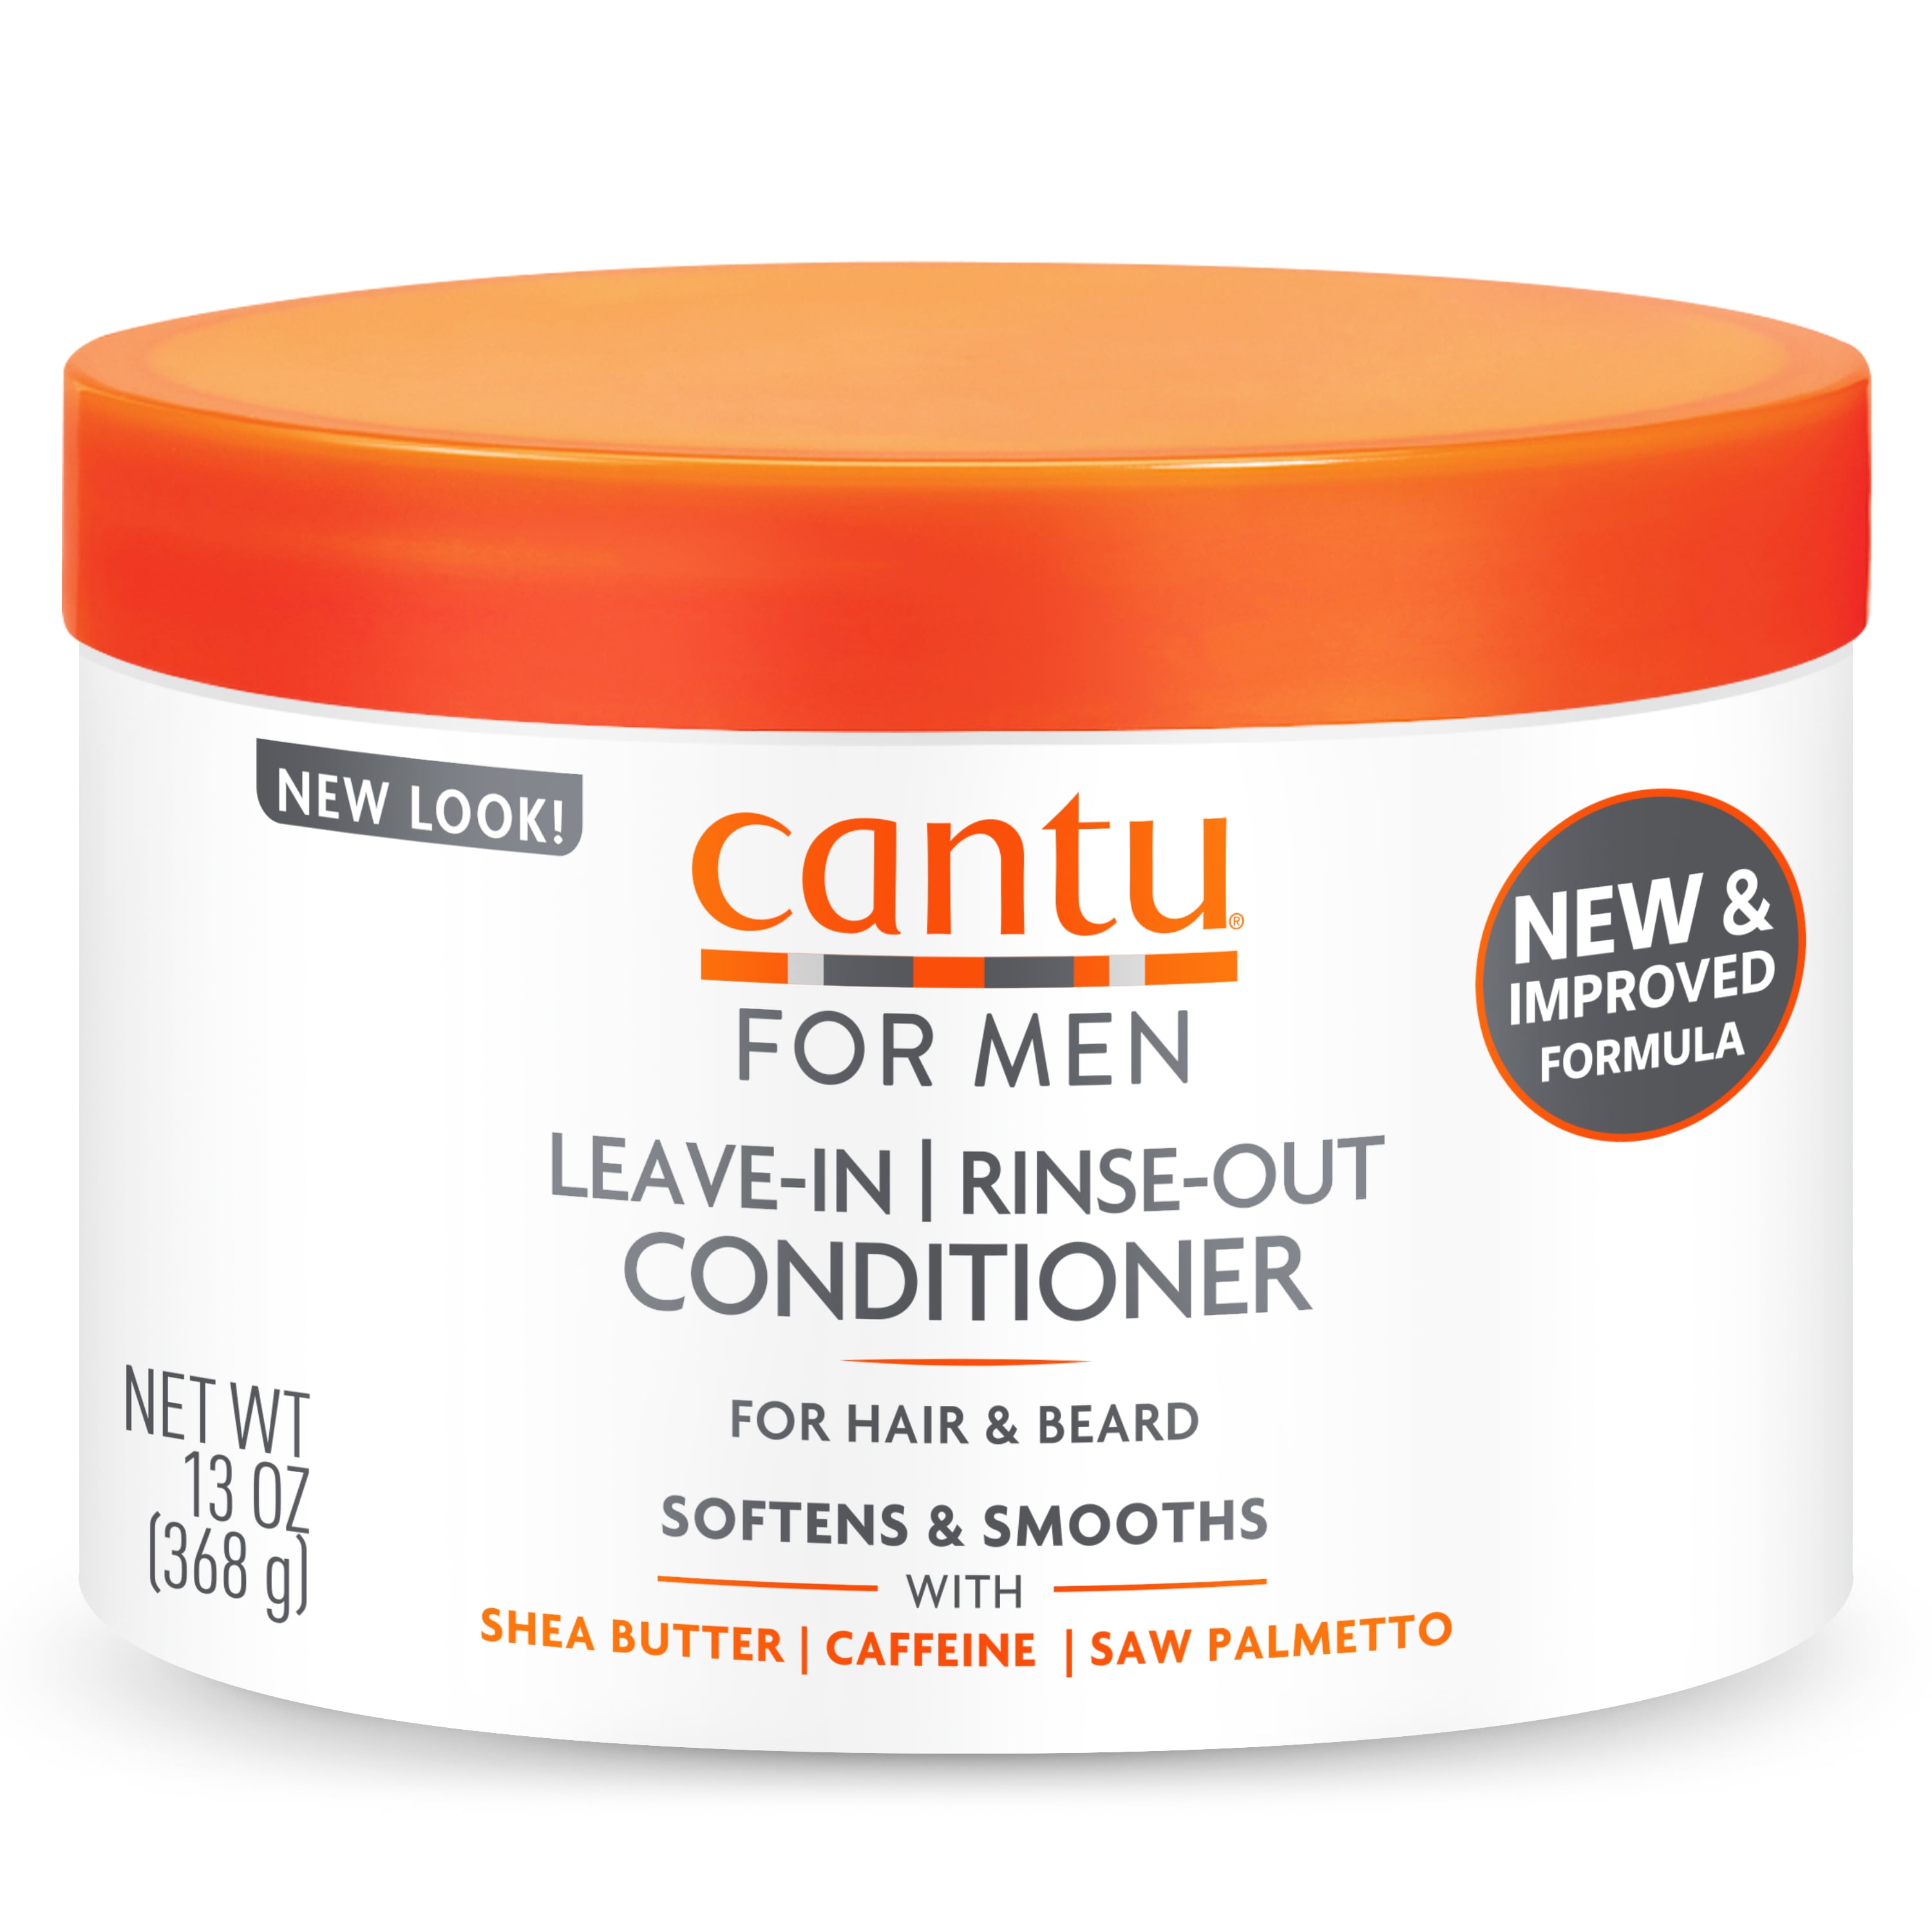 Cantu for Men Leave-In or Rinse-Out Conditioner for Hair & Beard, 13 oz